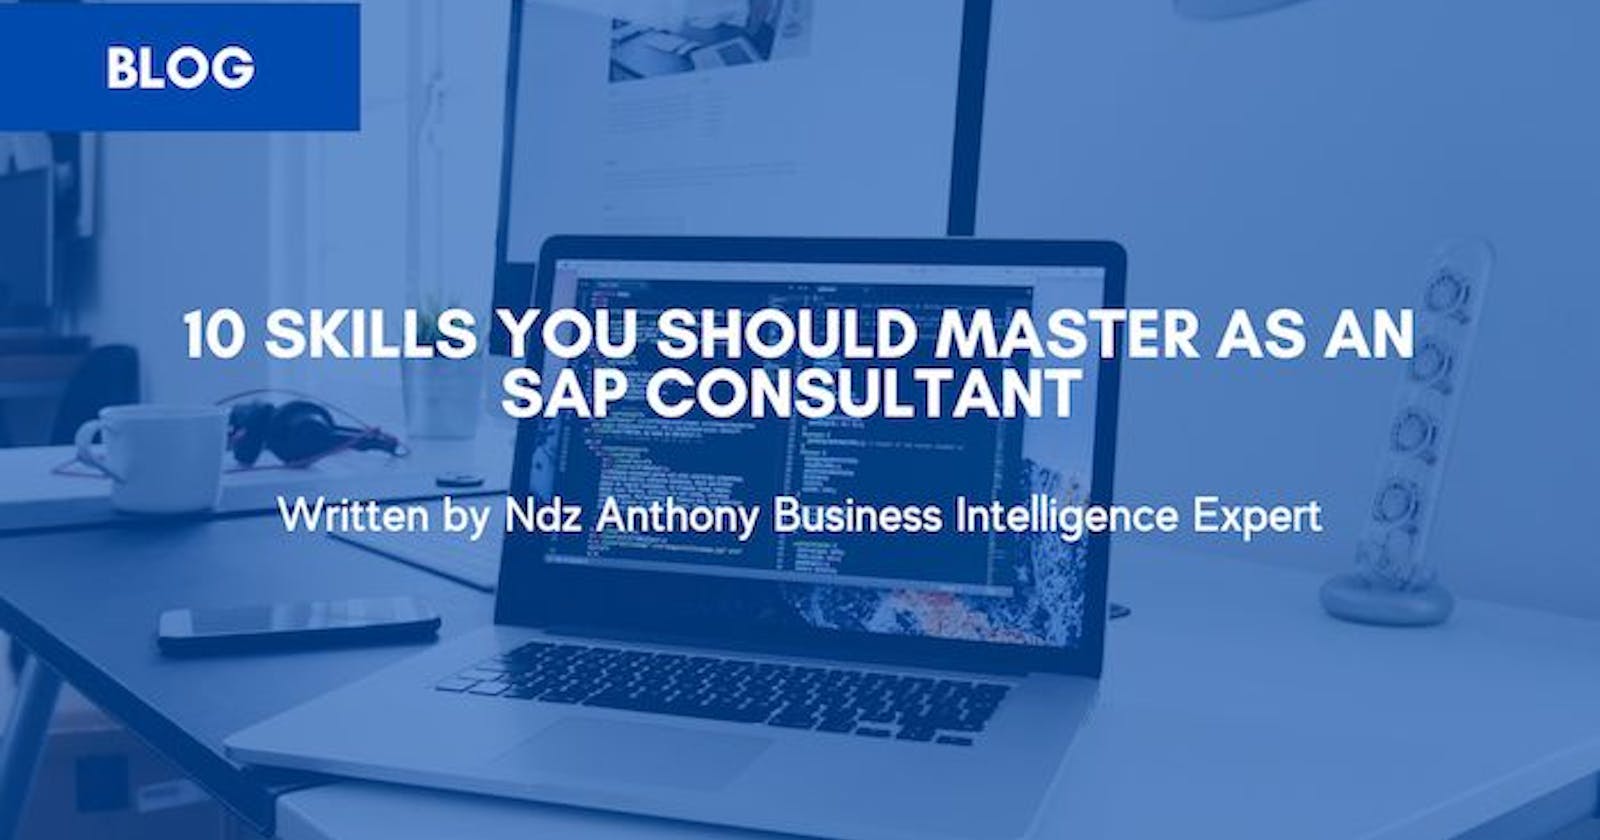 10 Skills You Should Master as an SAP Consultant